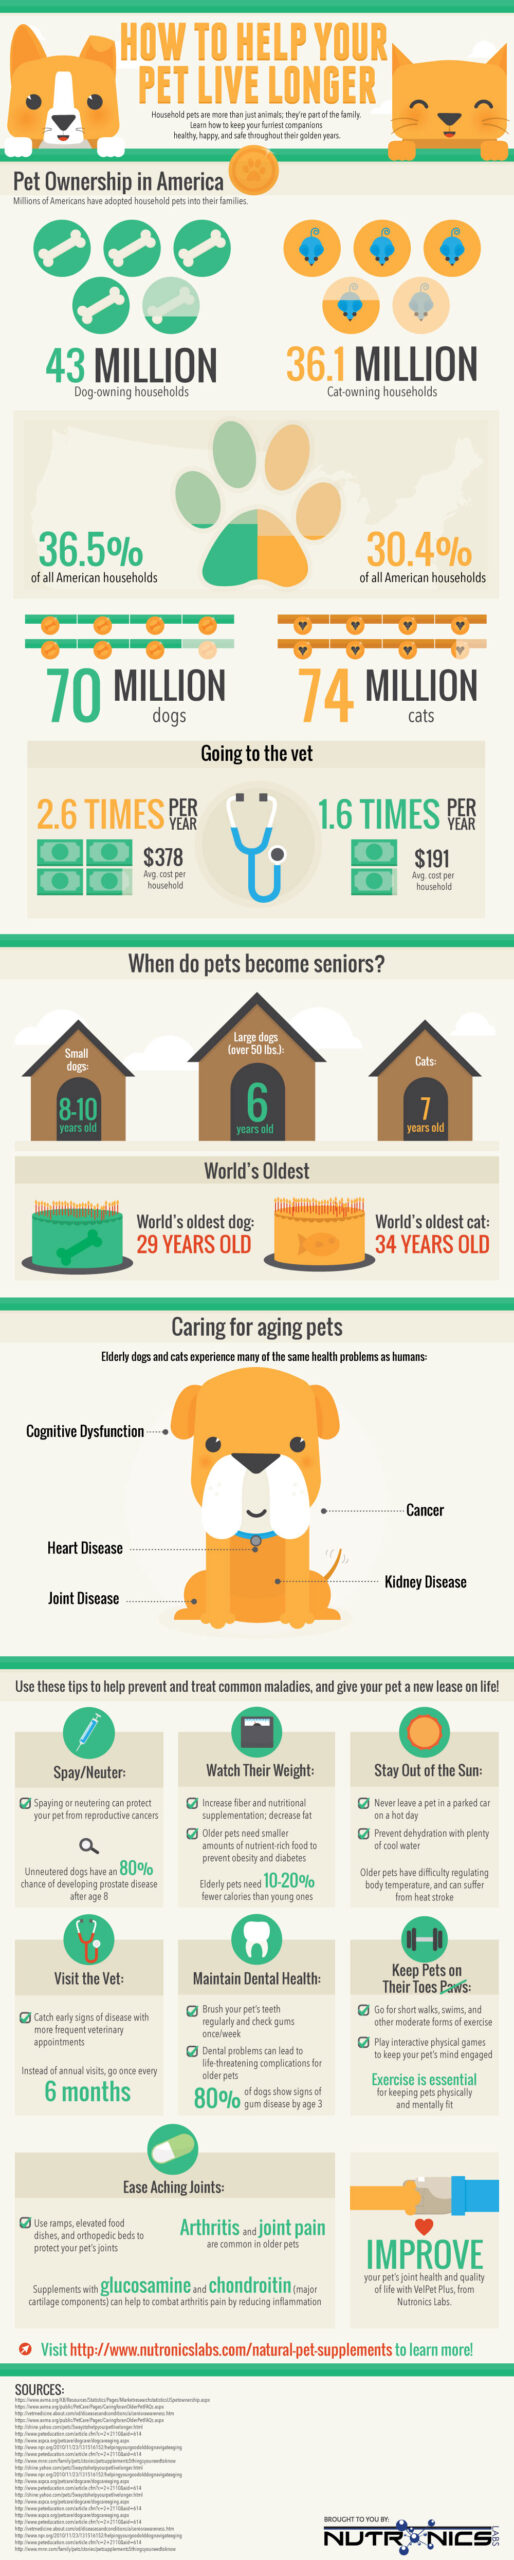 The Benefits of Owning a Pet Infographic | Visual.ly